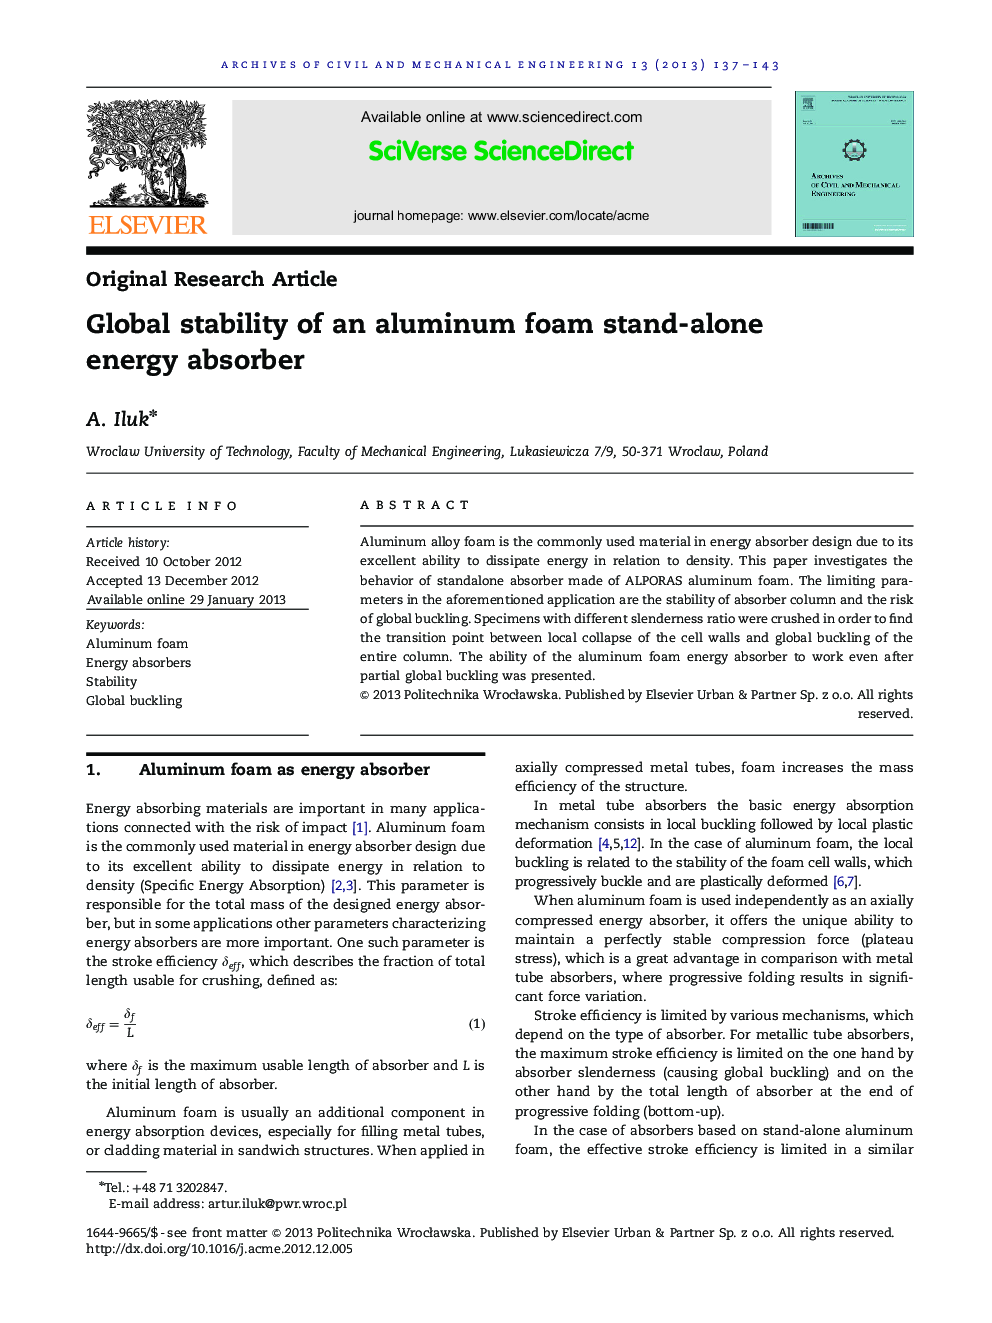 Global stability of an aluminum foam stand-alone energy absorber